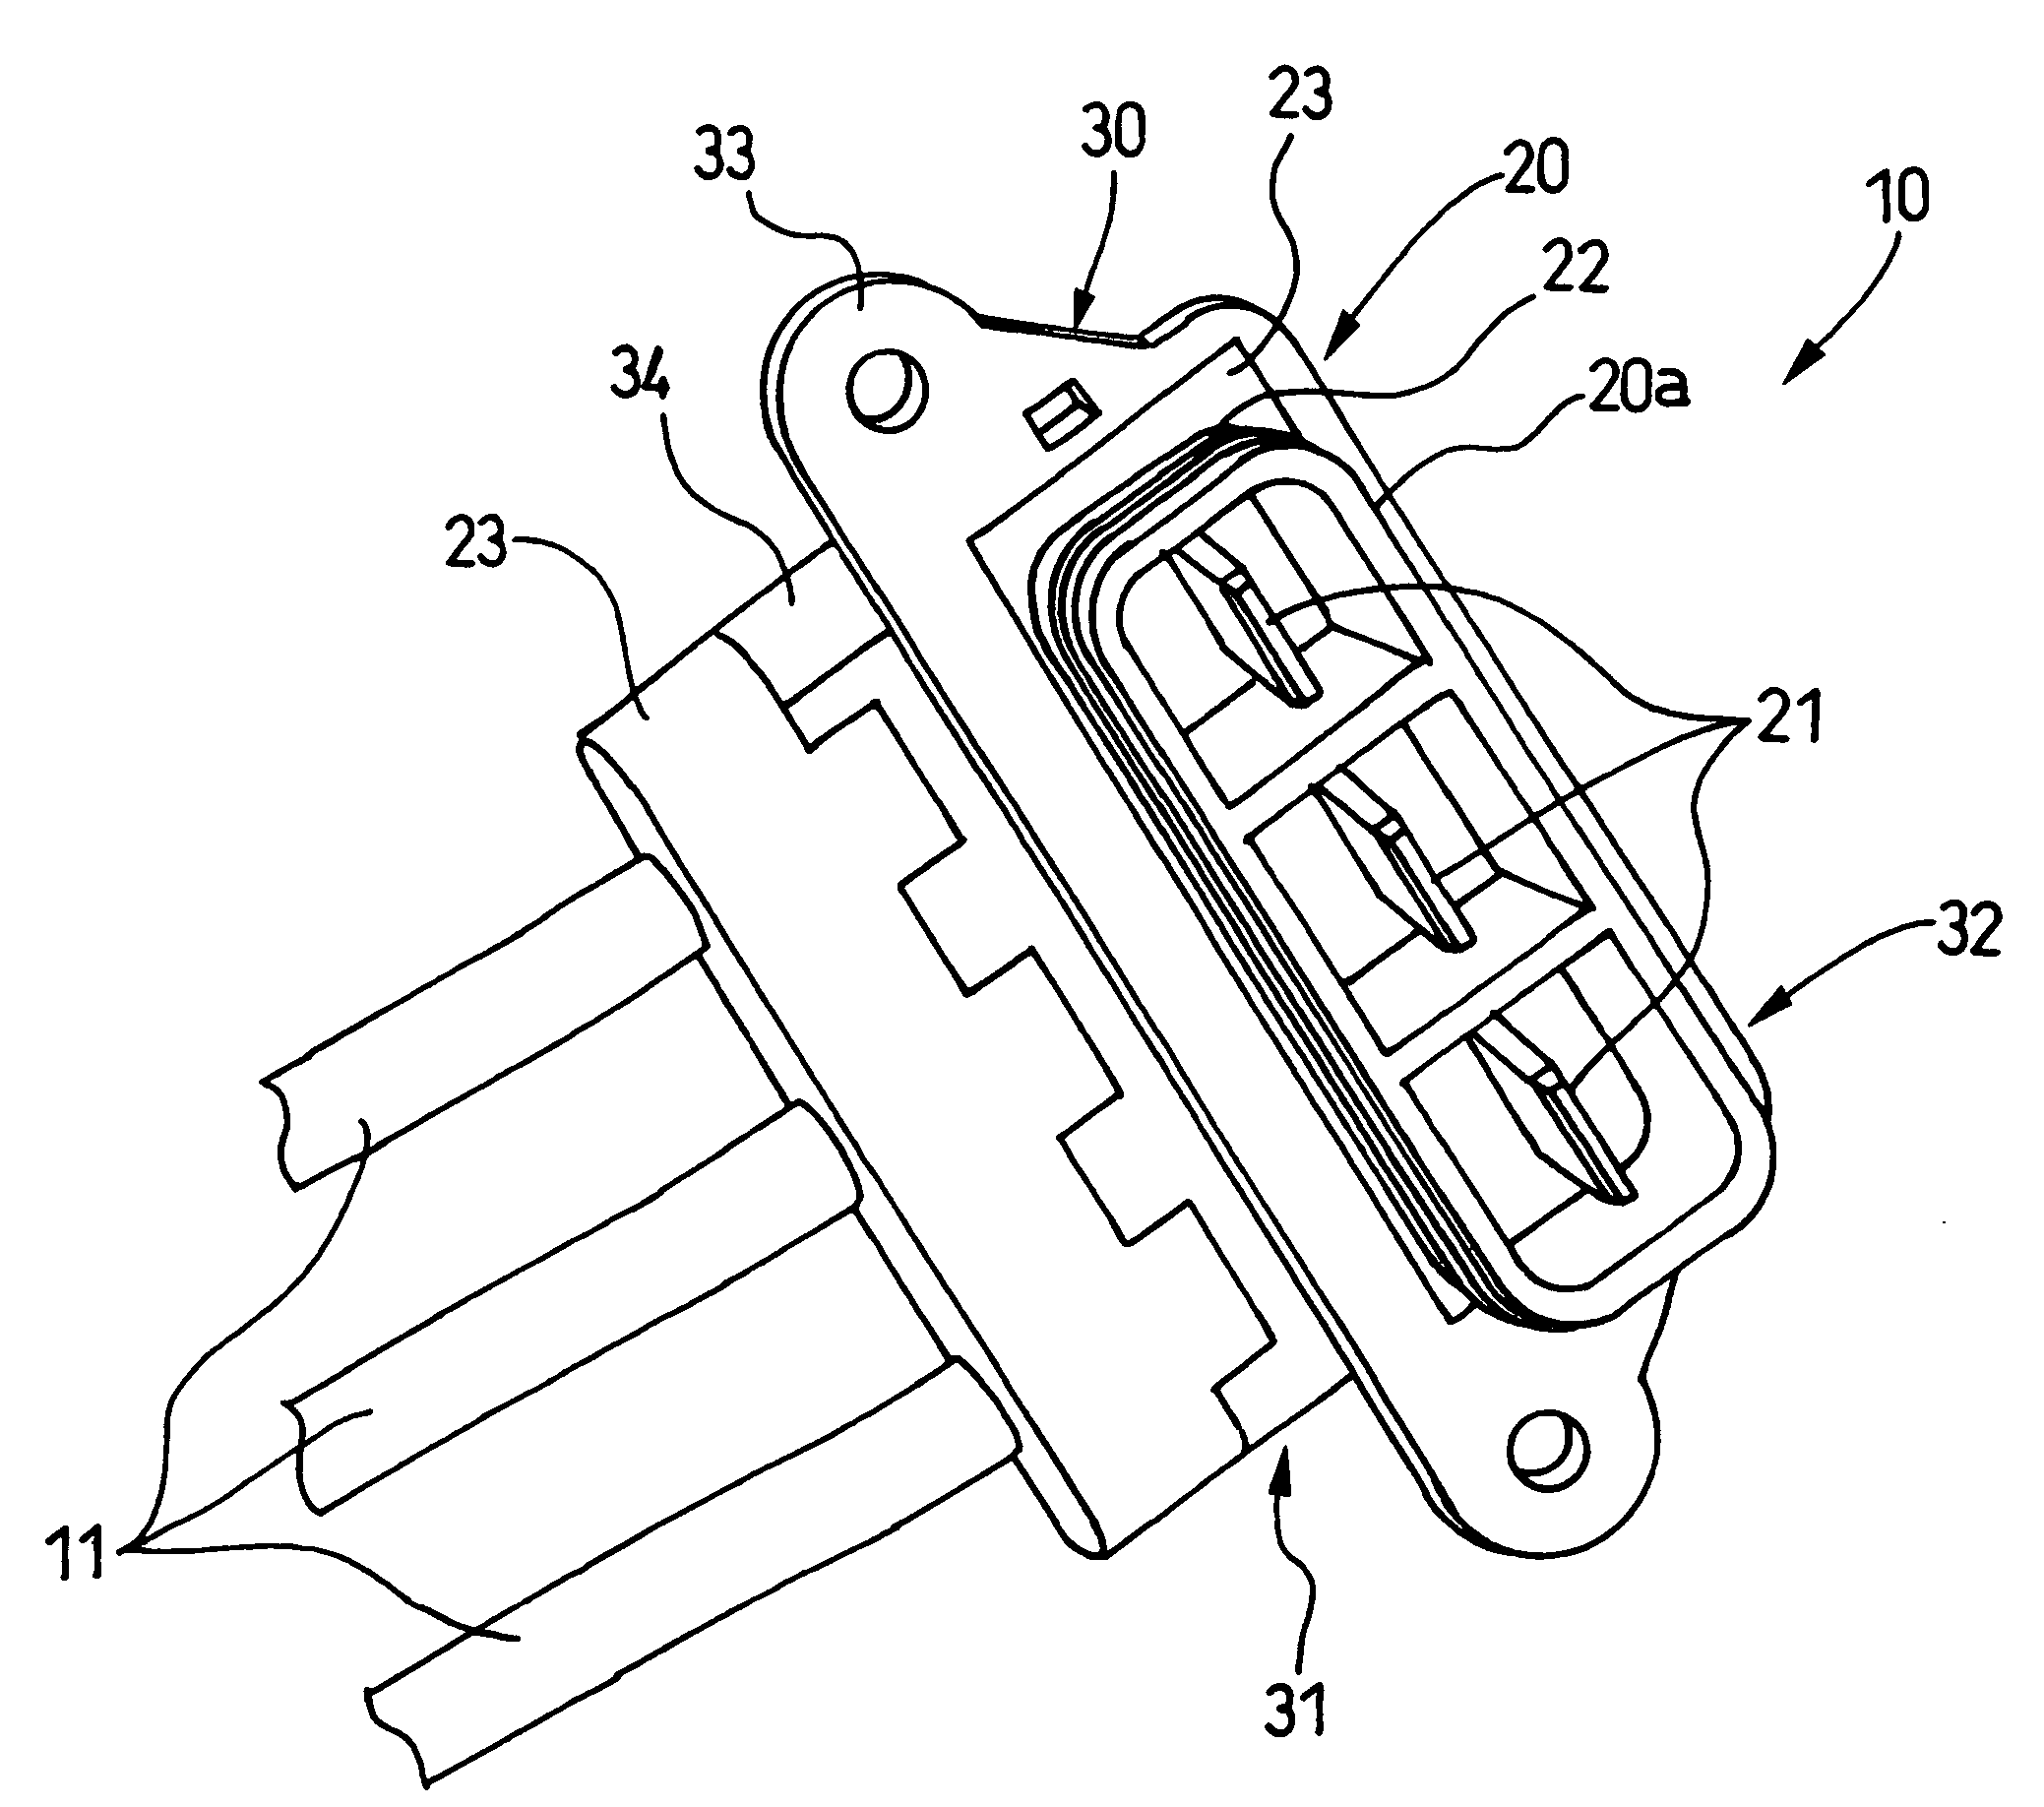 Electromagnetic interference shielded connector and method for assembling the same